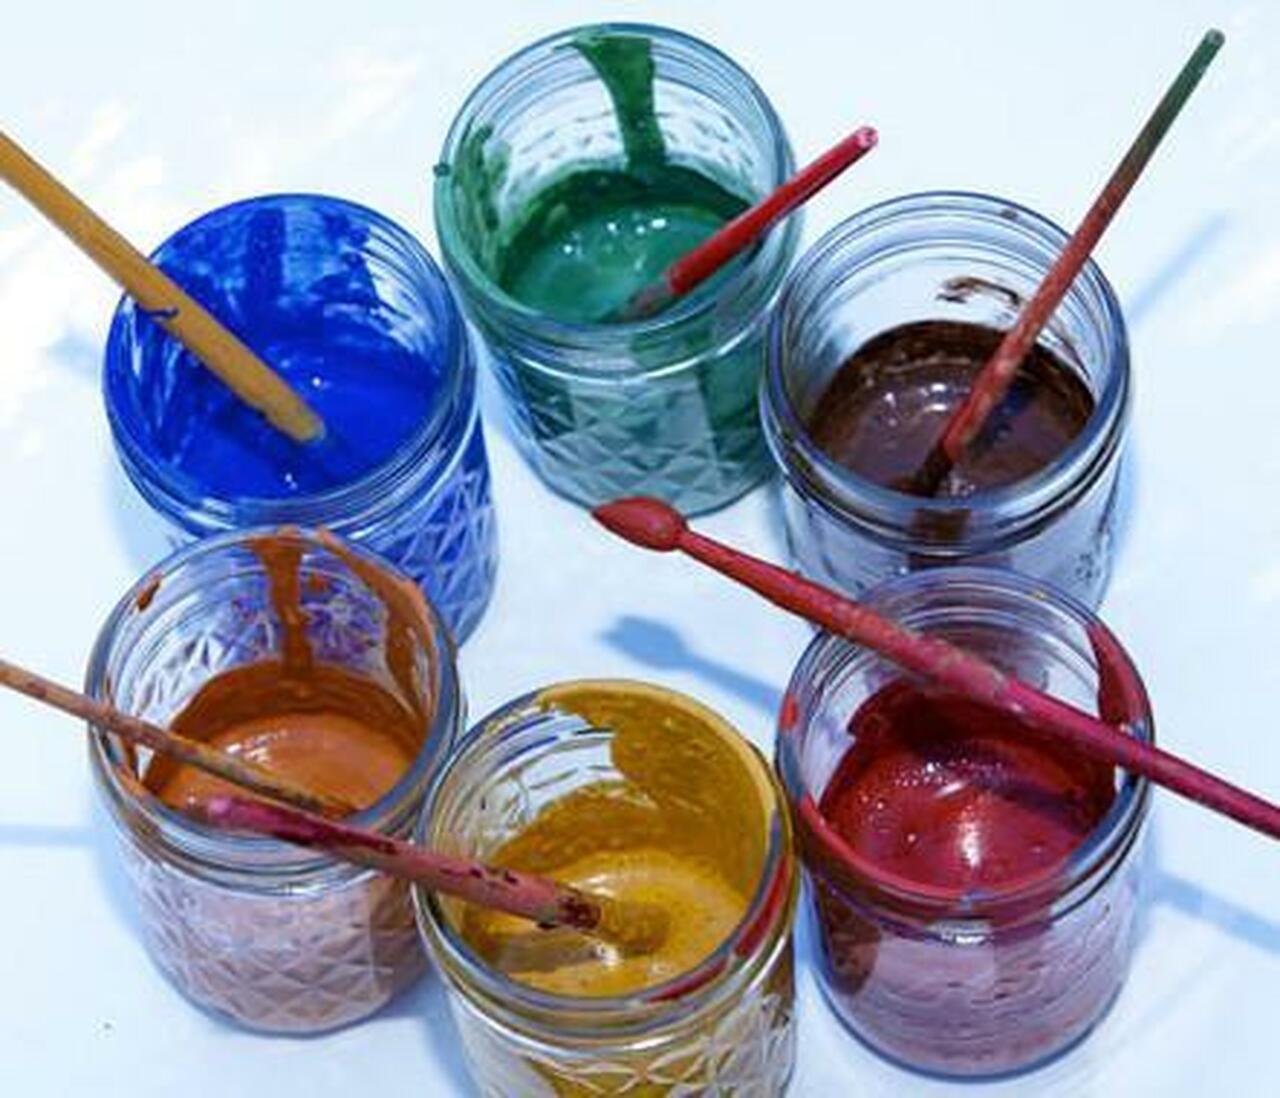 Natural Earth Paint | Mini Children's Earth Paint Kit Make and Wonder 